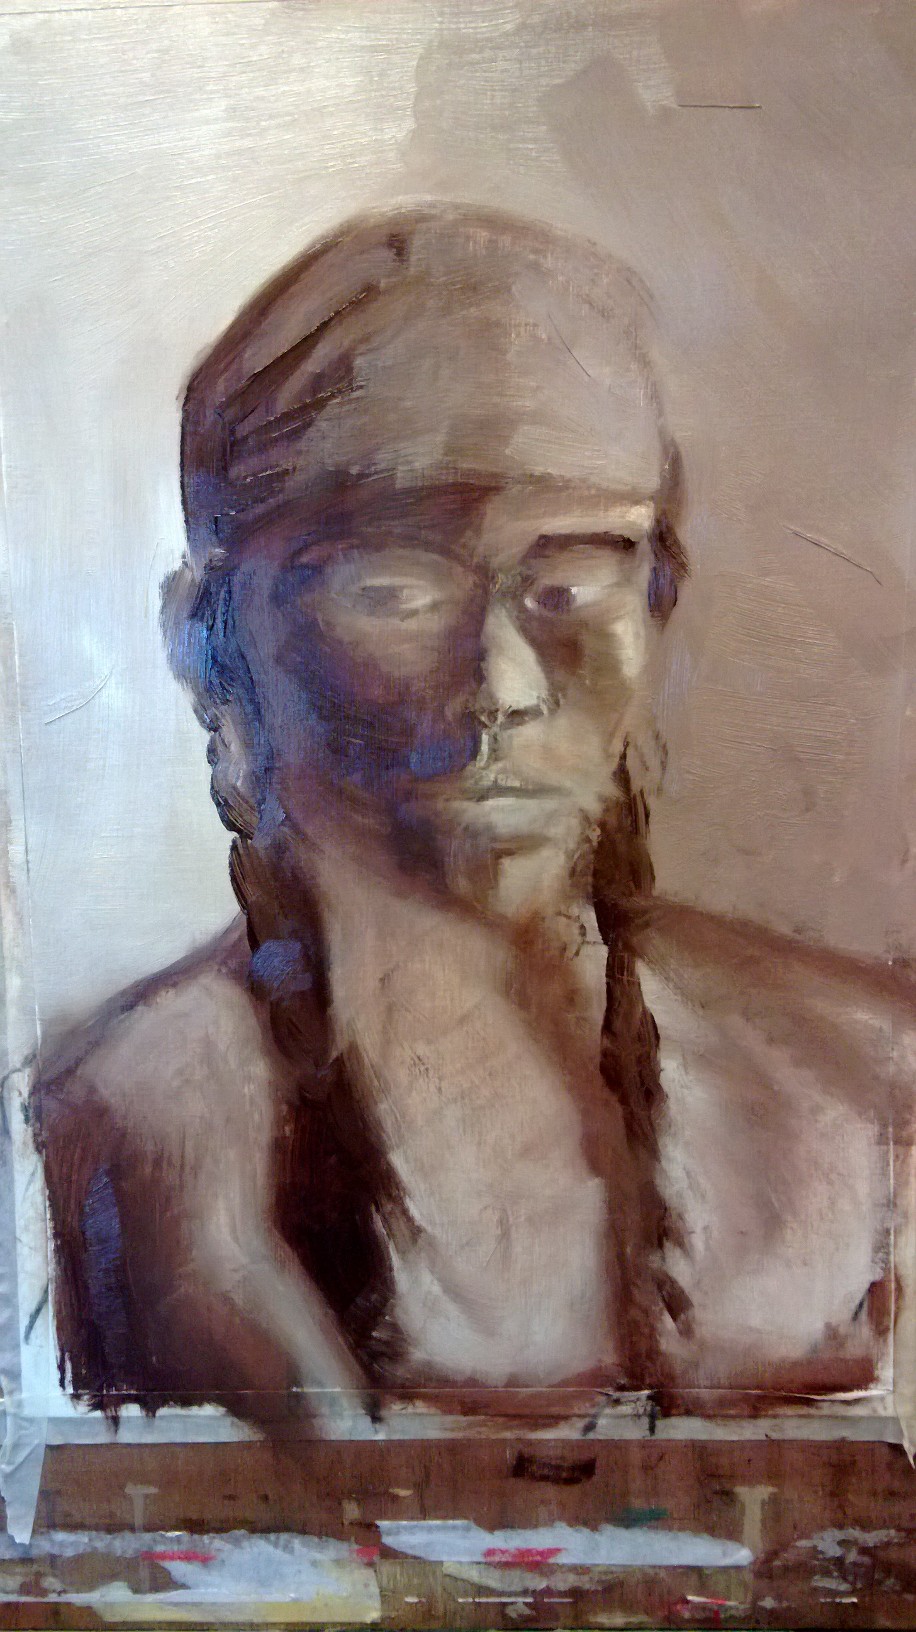 Excercise in portraiture painting in oilpaint:two sessions. This is the first session/ first monochrome layer.